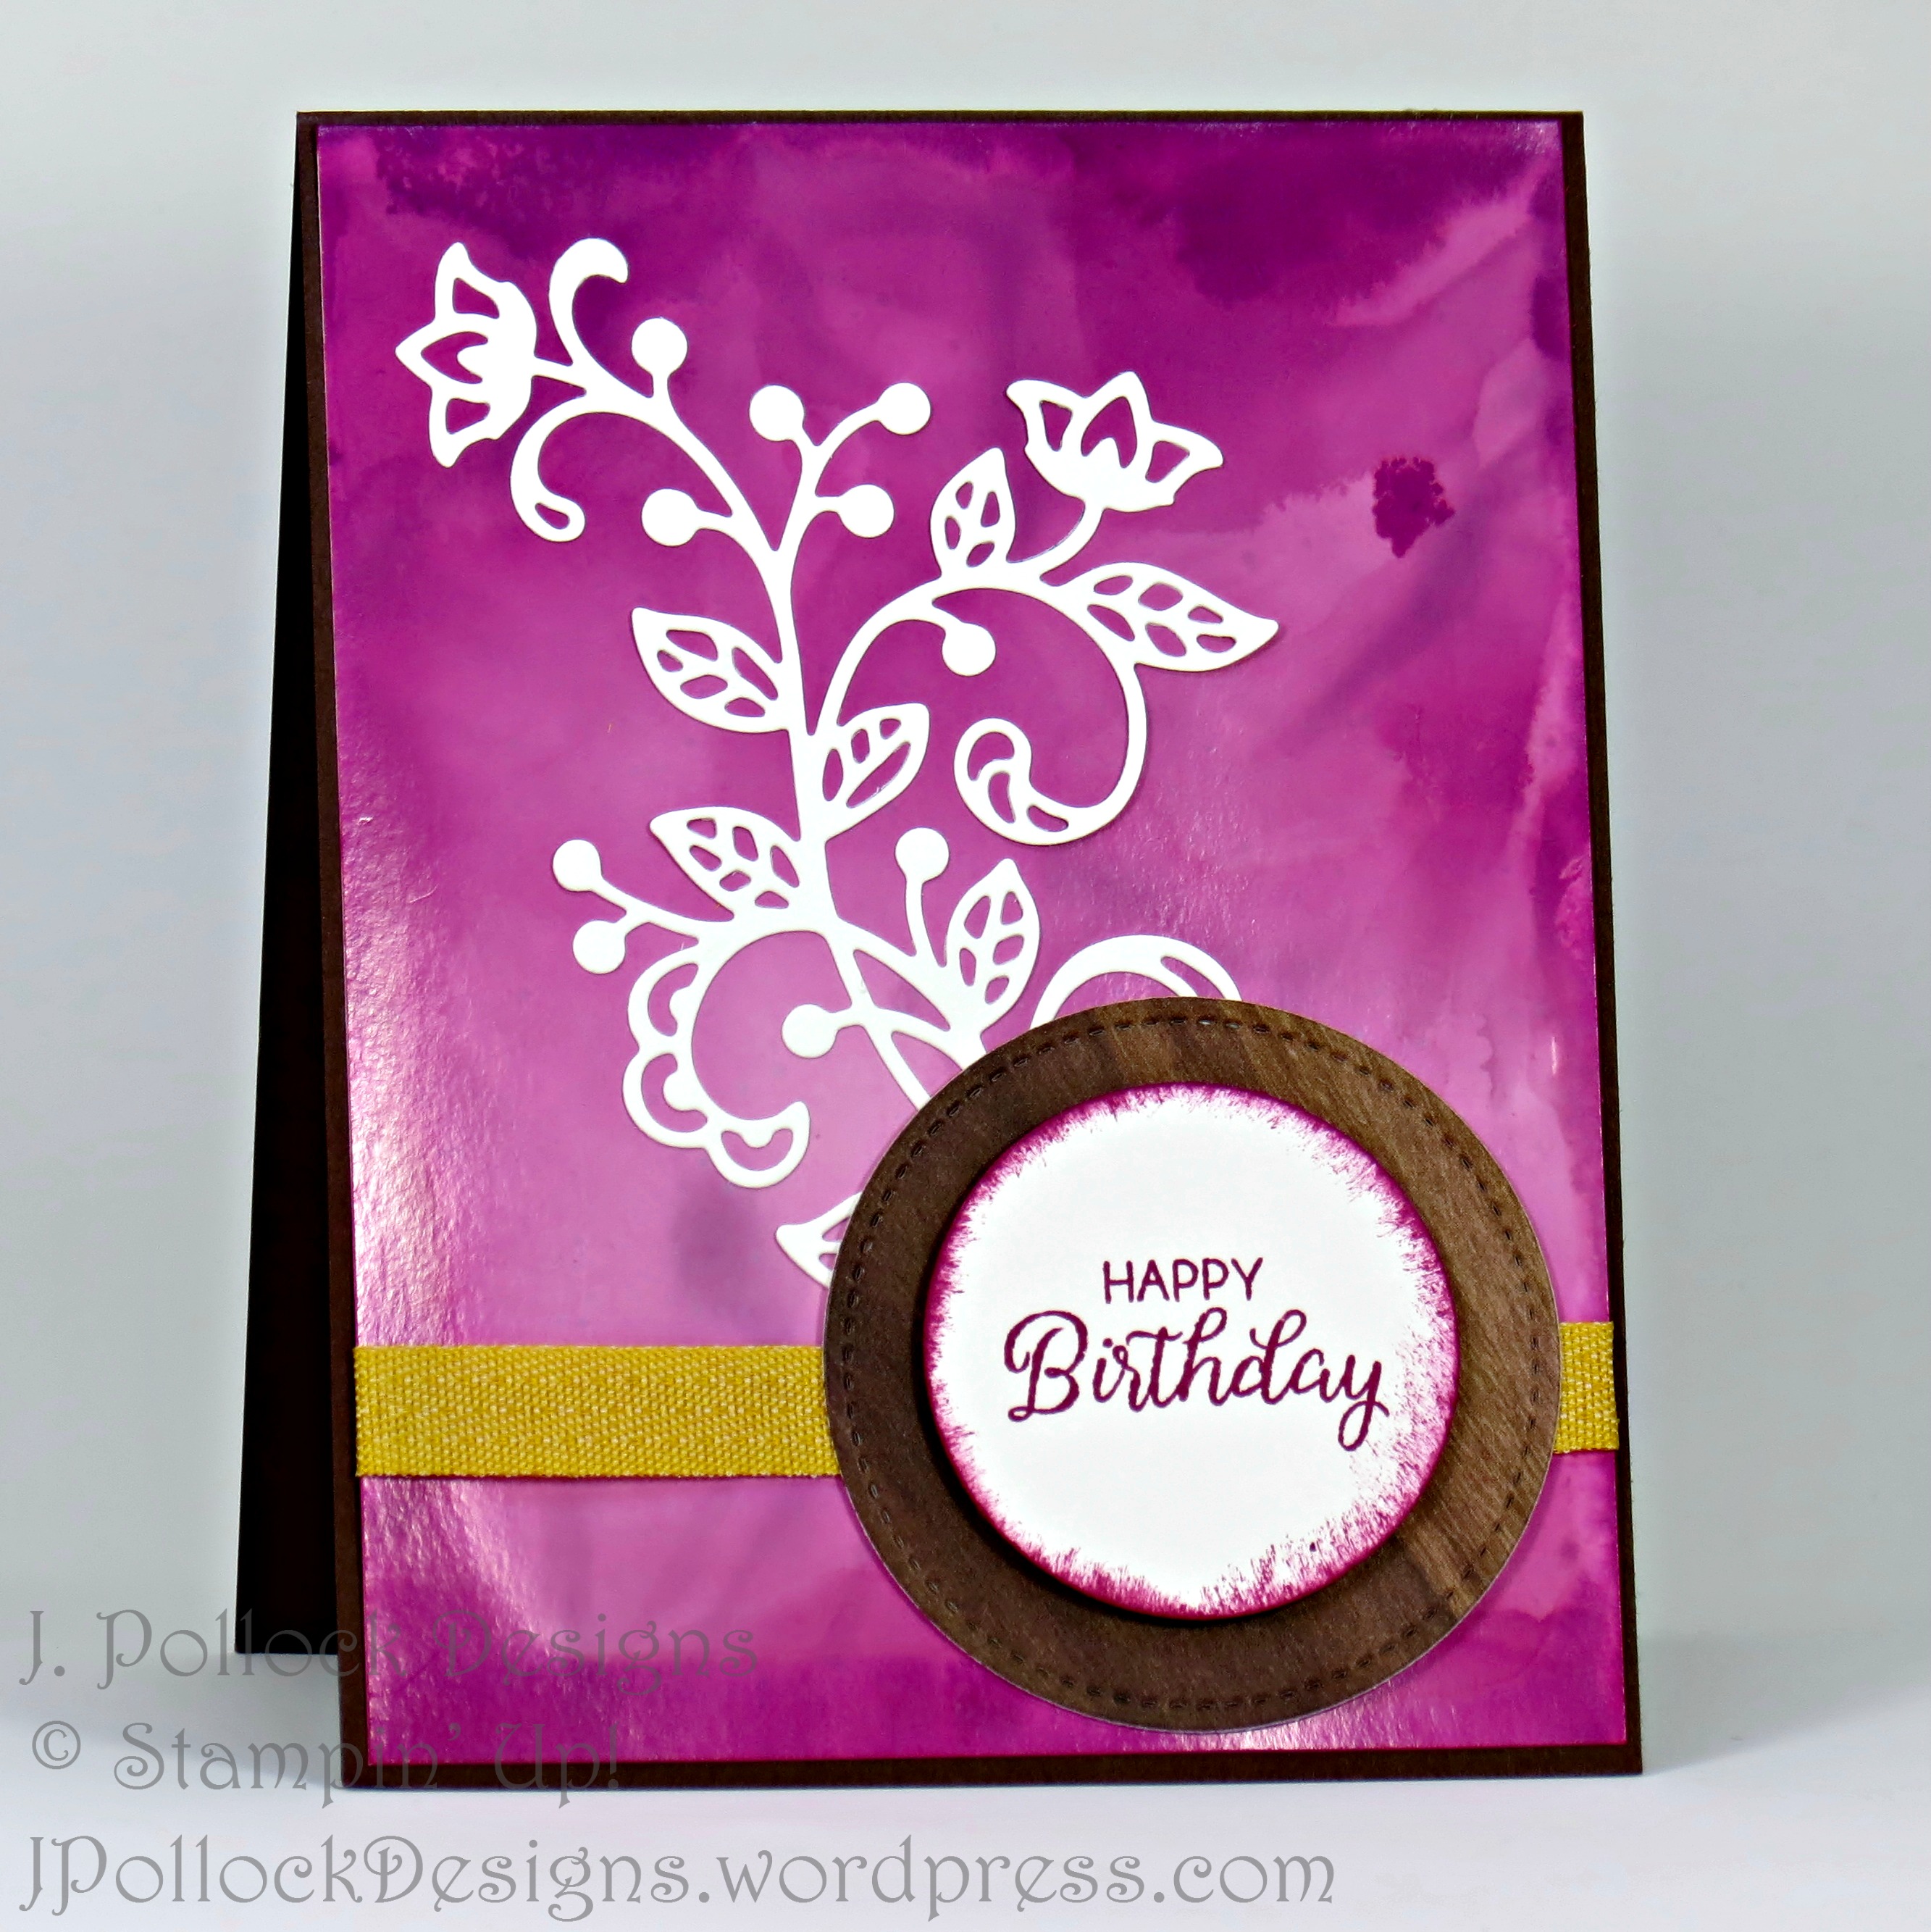 J. Pollock Designs - Stampin' Up! - Berry Burst, Glossy Cardstock, Wood Textures, Flourish Thinlets, Stitched Shapes